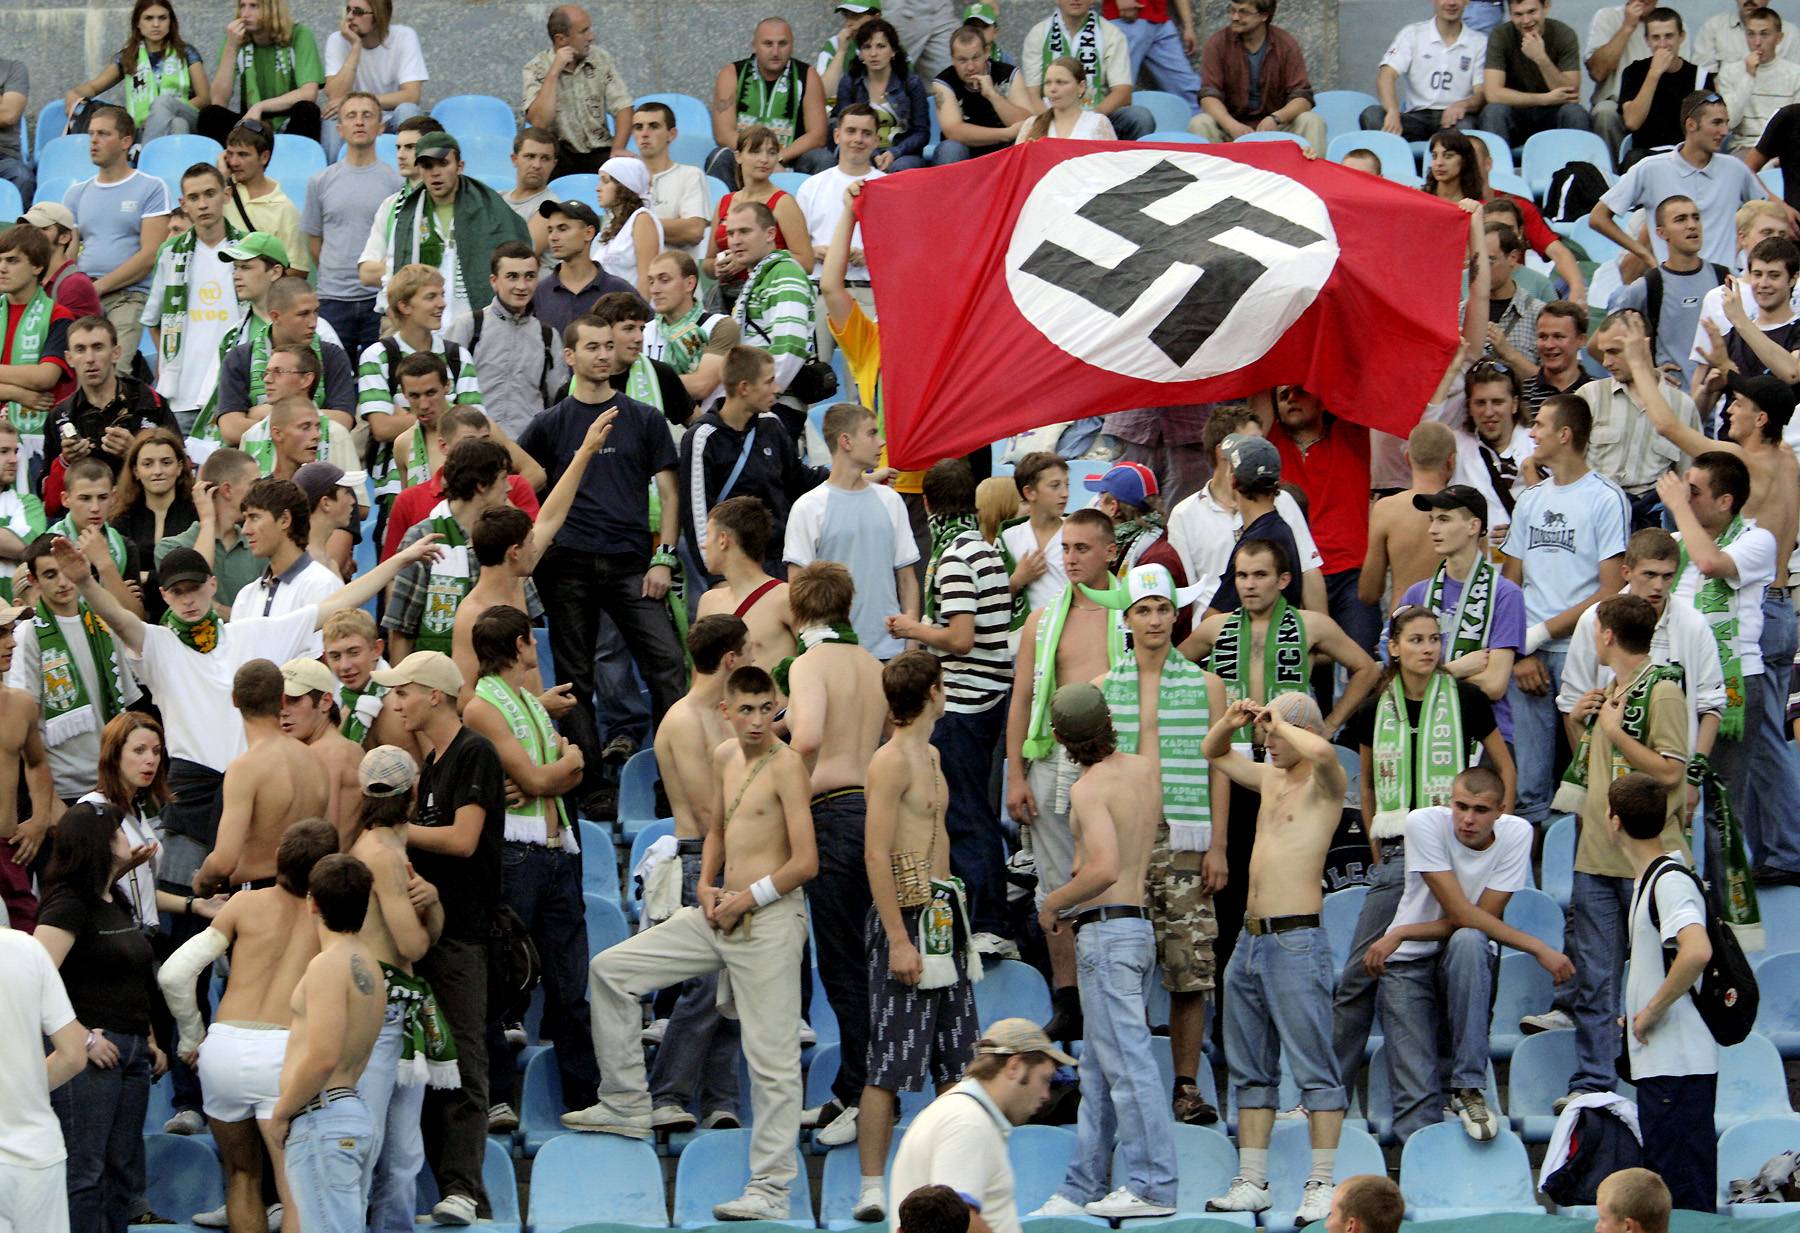 Nazis on the Loose? - Out-of-control fans earned the German soccer association a $31,200 fine after fans&nbsp;displayed a neo-Nazi flag&nbsp;during Germany’s Euro Cup match against Greece last Friday.&nbsp;(Photo: REUTERS/Stringer/Files)